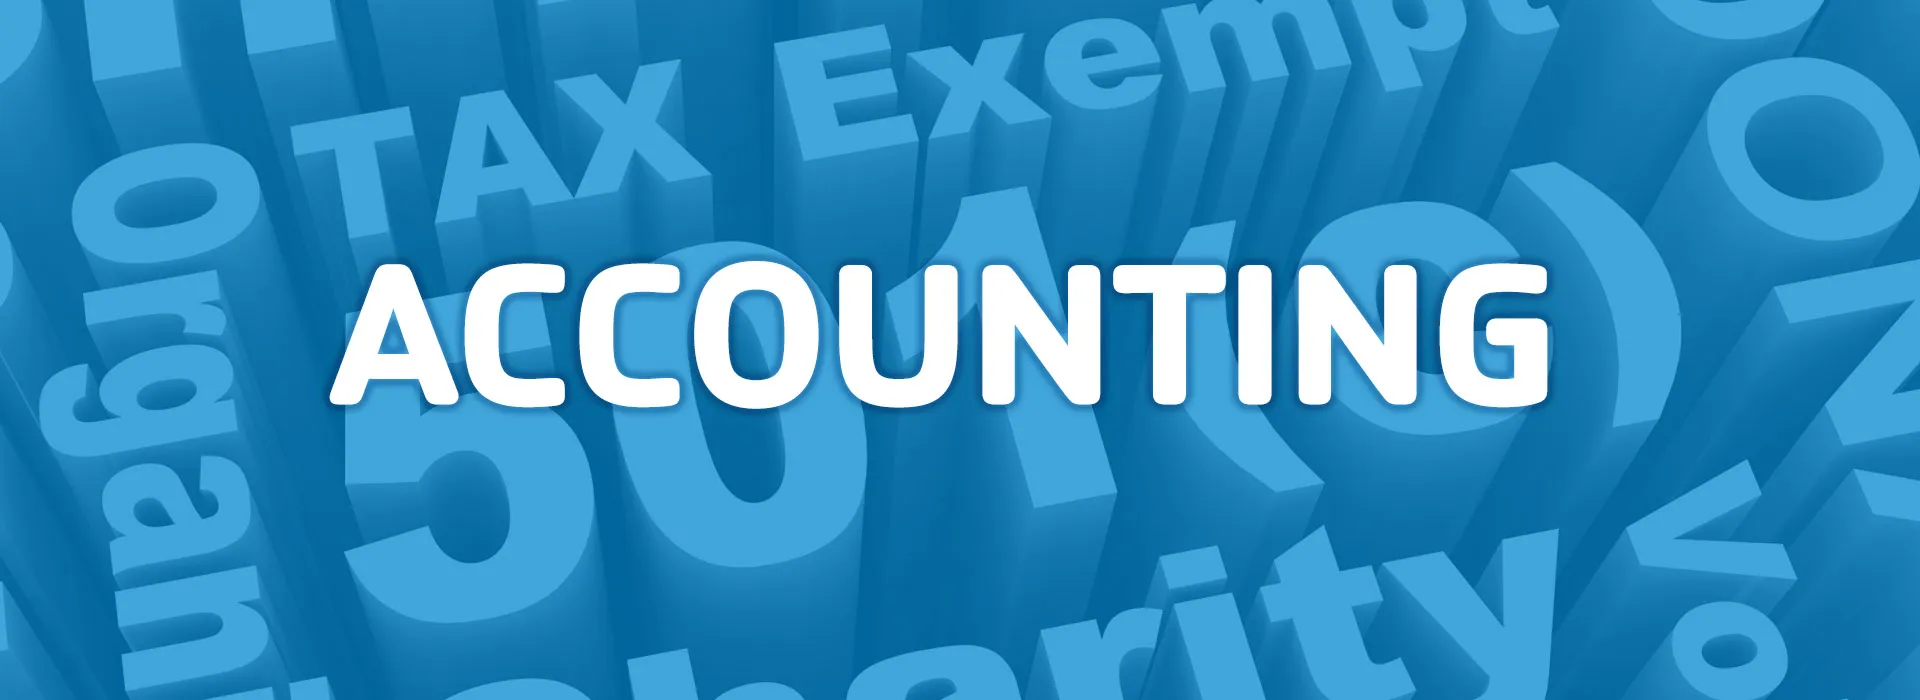 Word Accounting with non profit terms in background image